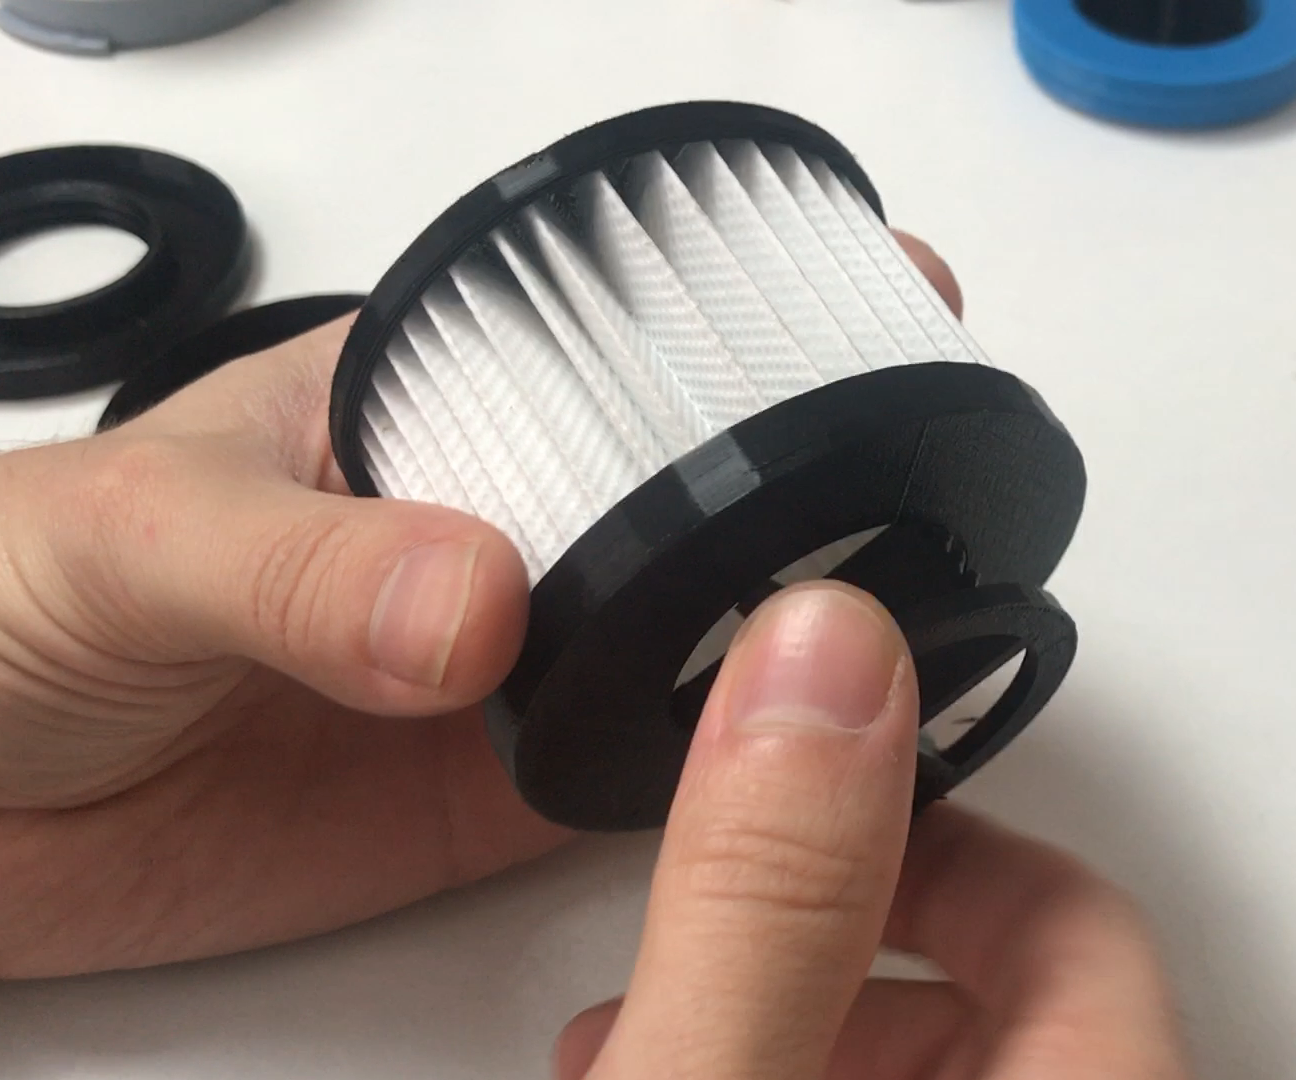 DIY Universal HEPA Filter Prototype Made With Open Source 3D Printed Parts